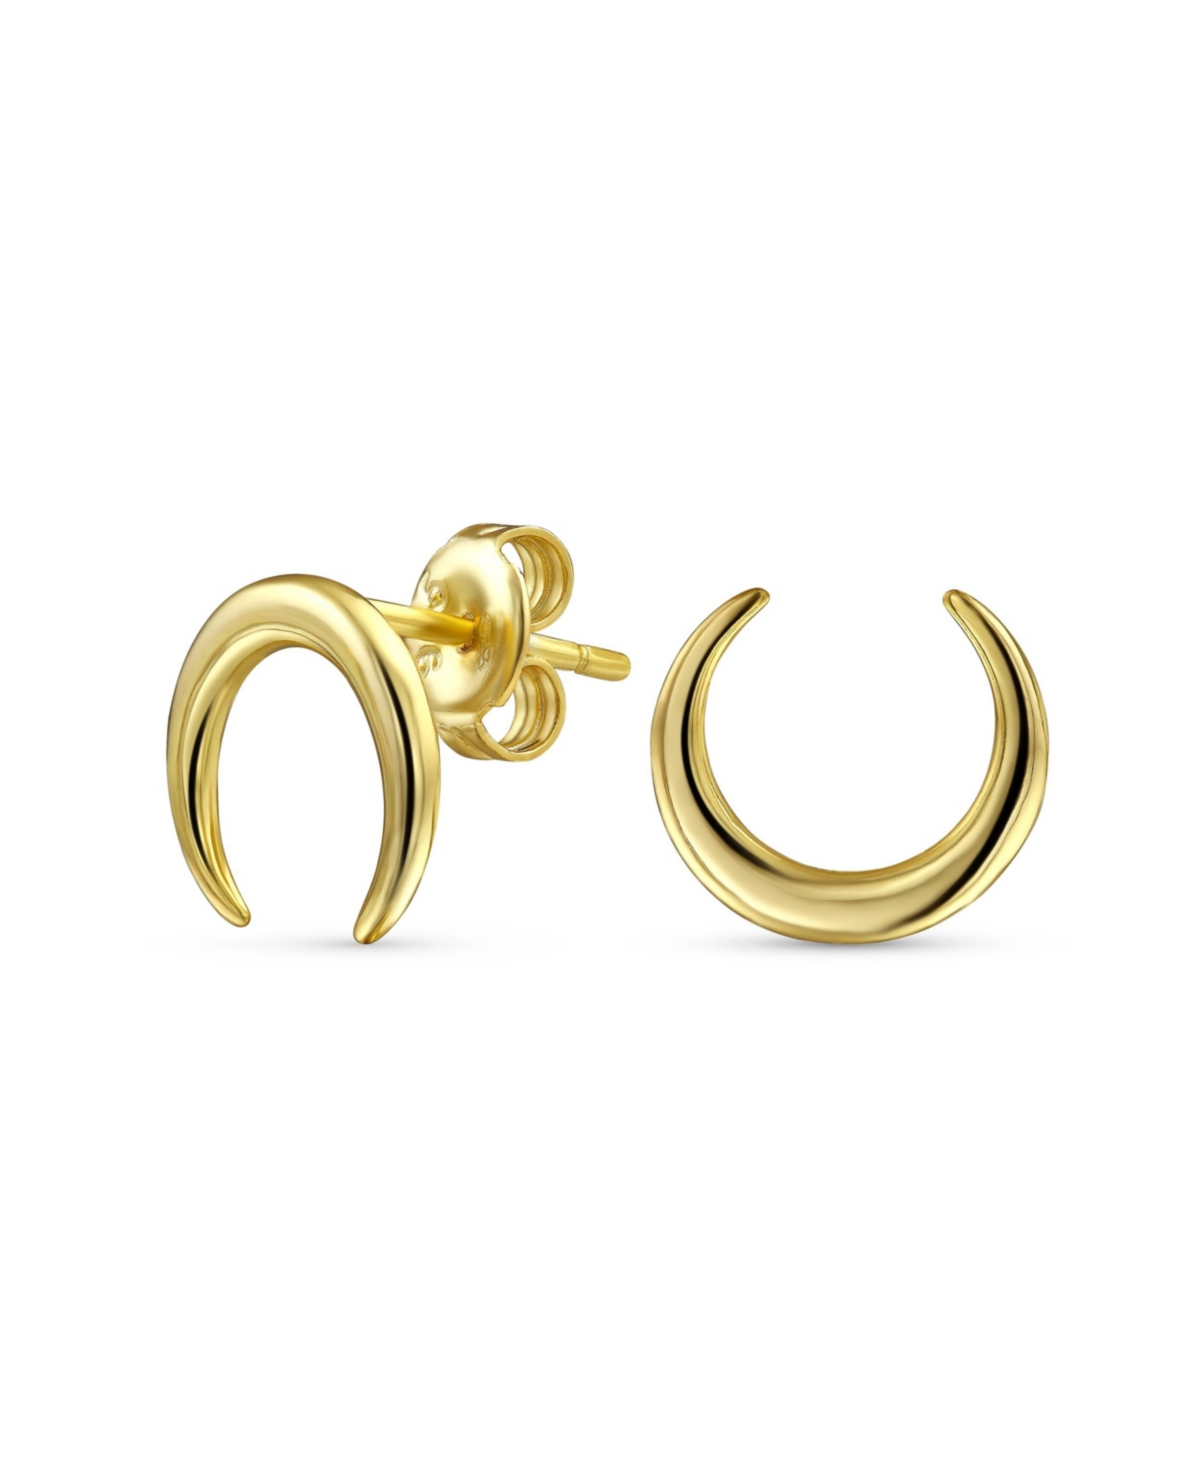 Western Jewelry Boho Tribal Style Minimalist Horn Crescent Luna Waning Half Moon Earrings For Women Teen Gold Plated .925 Sterling Silver - Gold tone